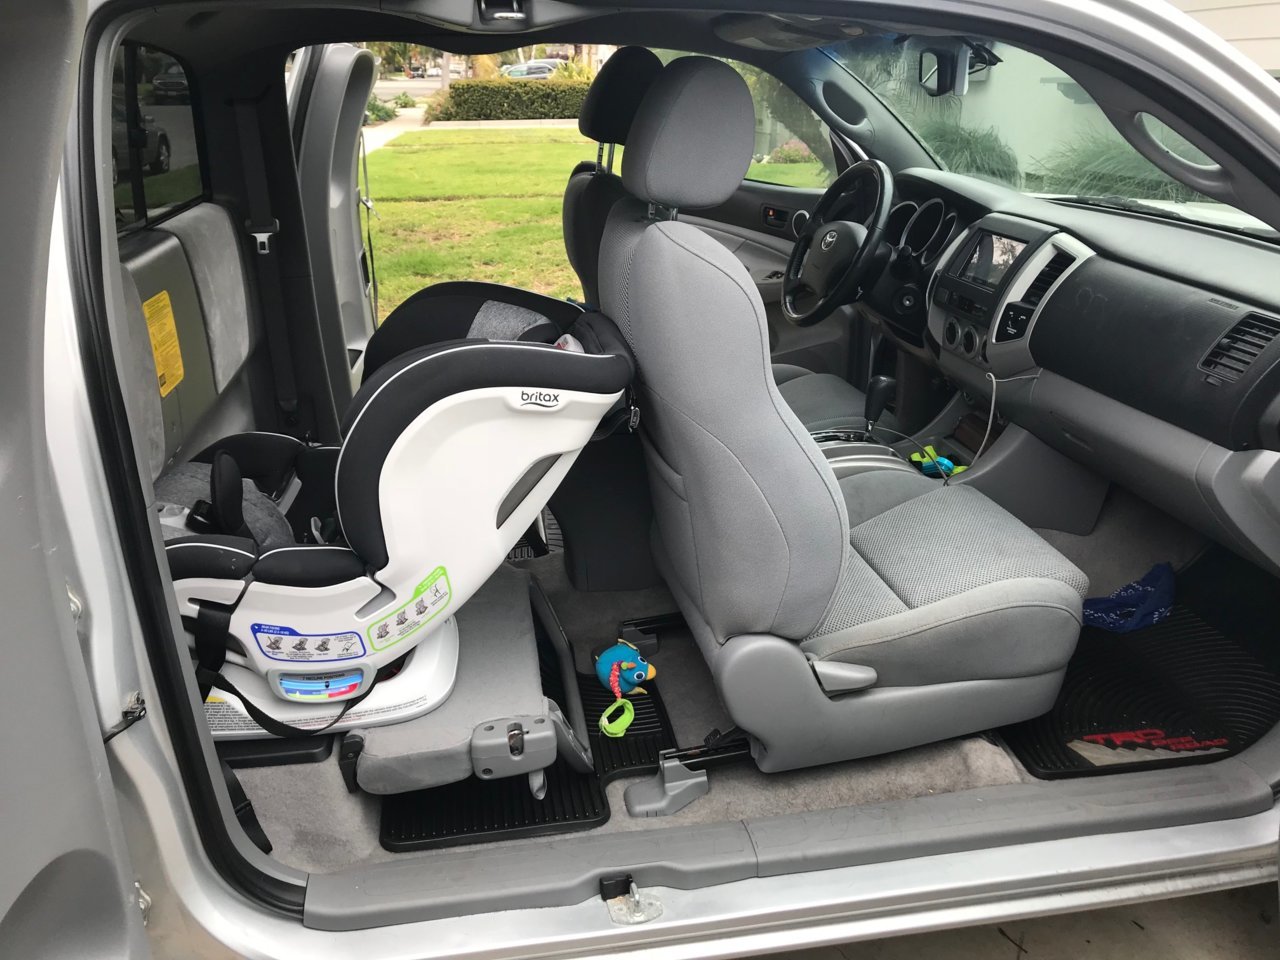 Rear Facing Car Seat In Access Cab, Can A Rear Facing Car Seat Fit In An Extended Cab Truck